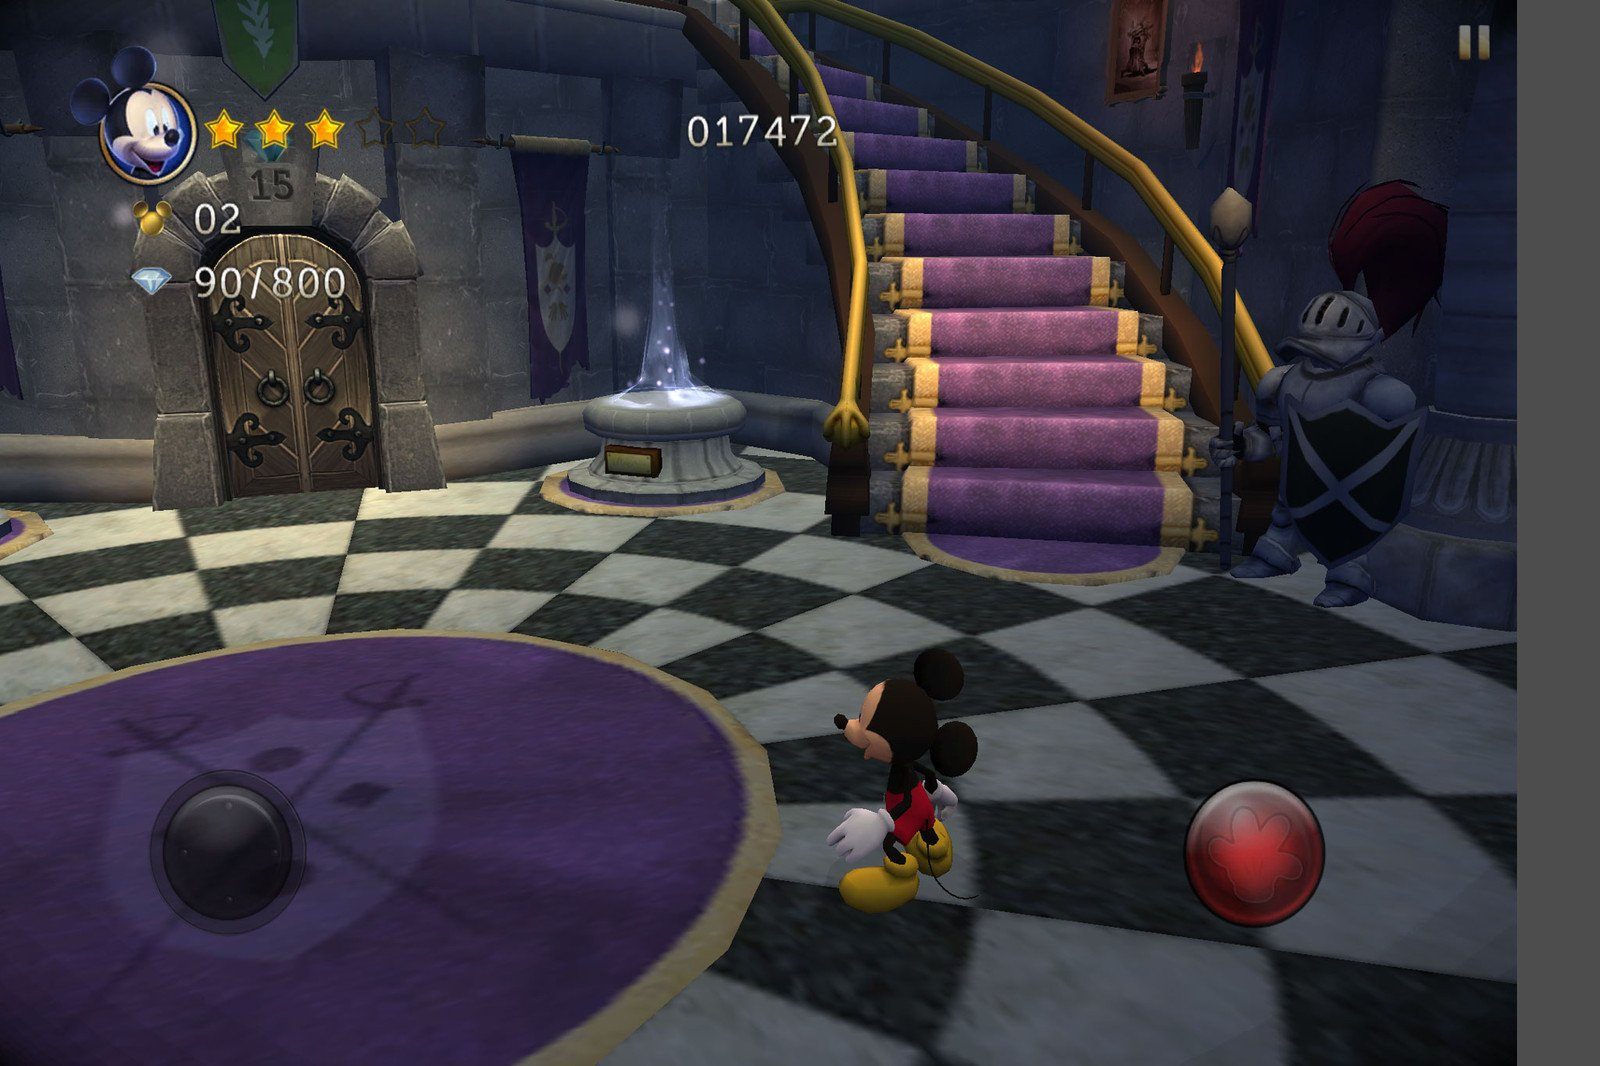 How To Get Stars In Castle Of Illusion